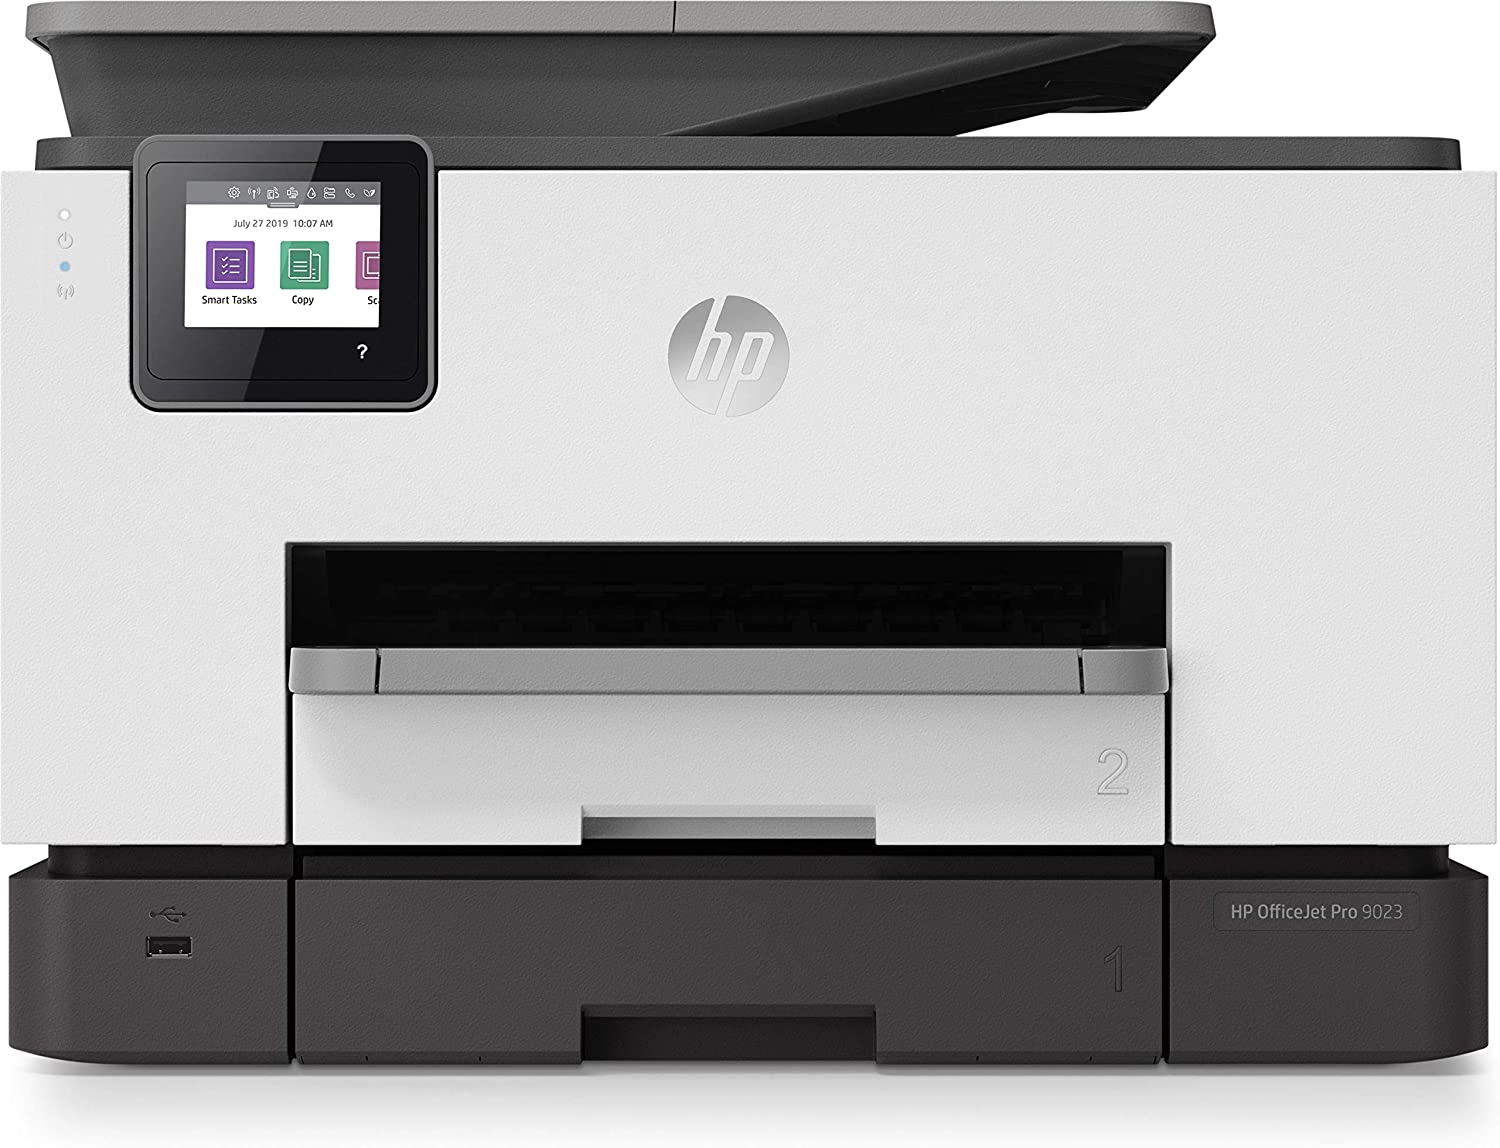 HP OfficeJet Pro 9023 All-in-One Printer0